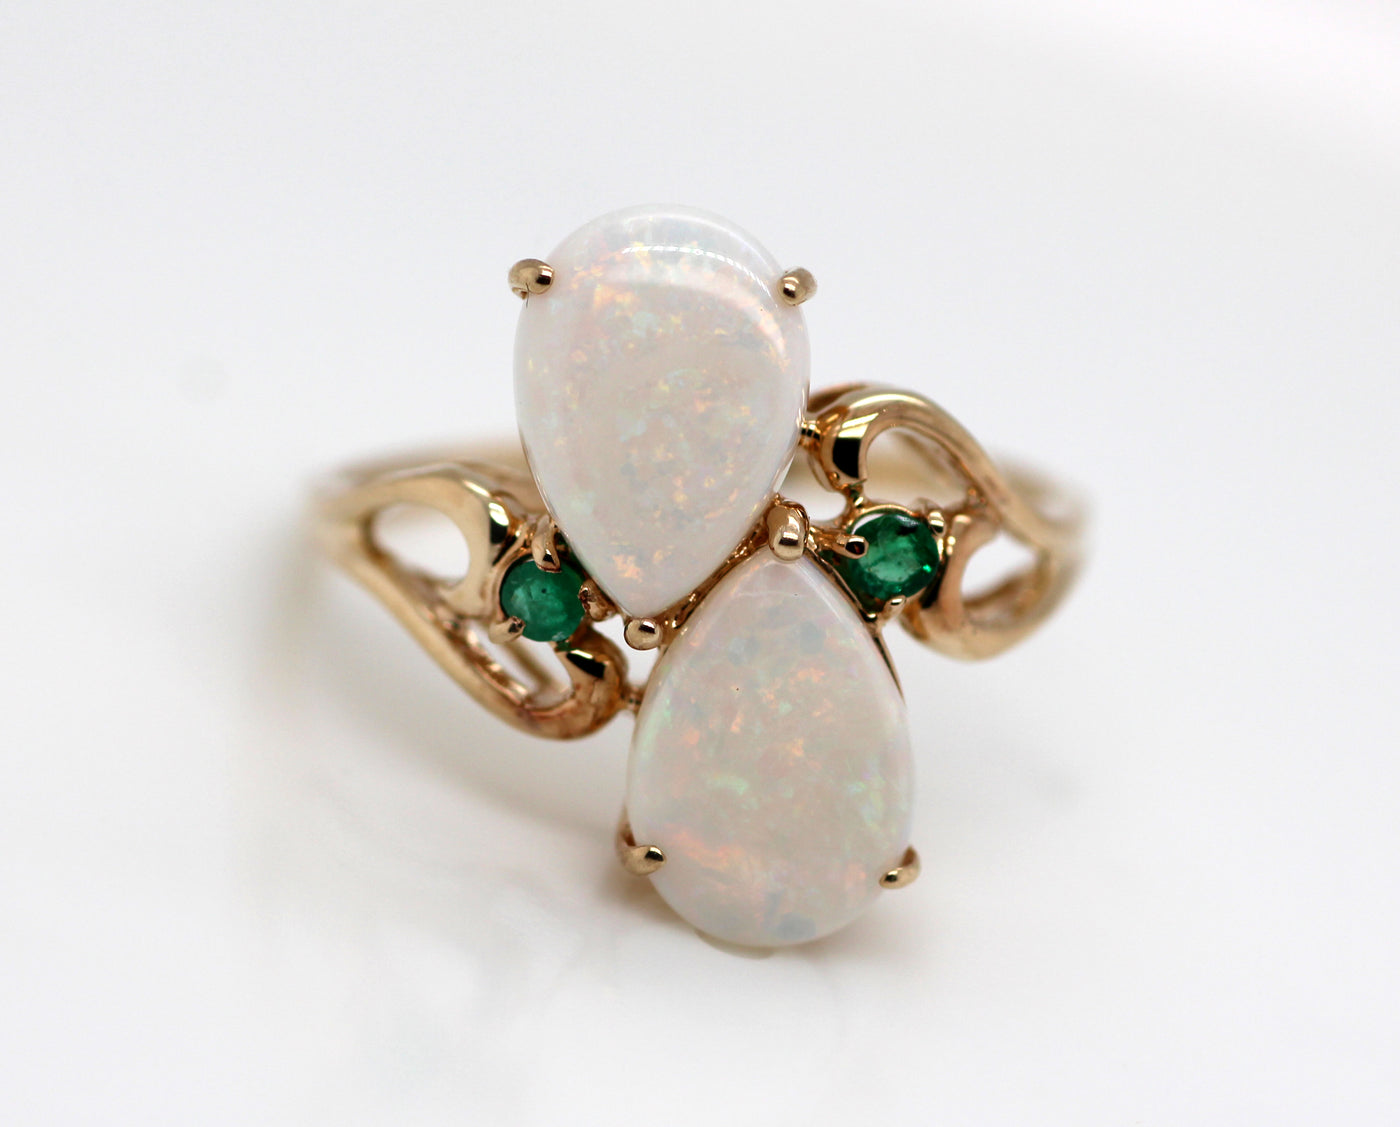 ESTATE 10KY 1.50 CTTW OPAL AND .04 CTTW EMERALD RING